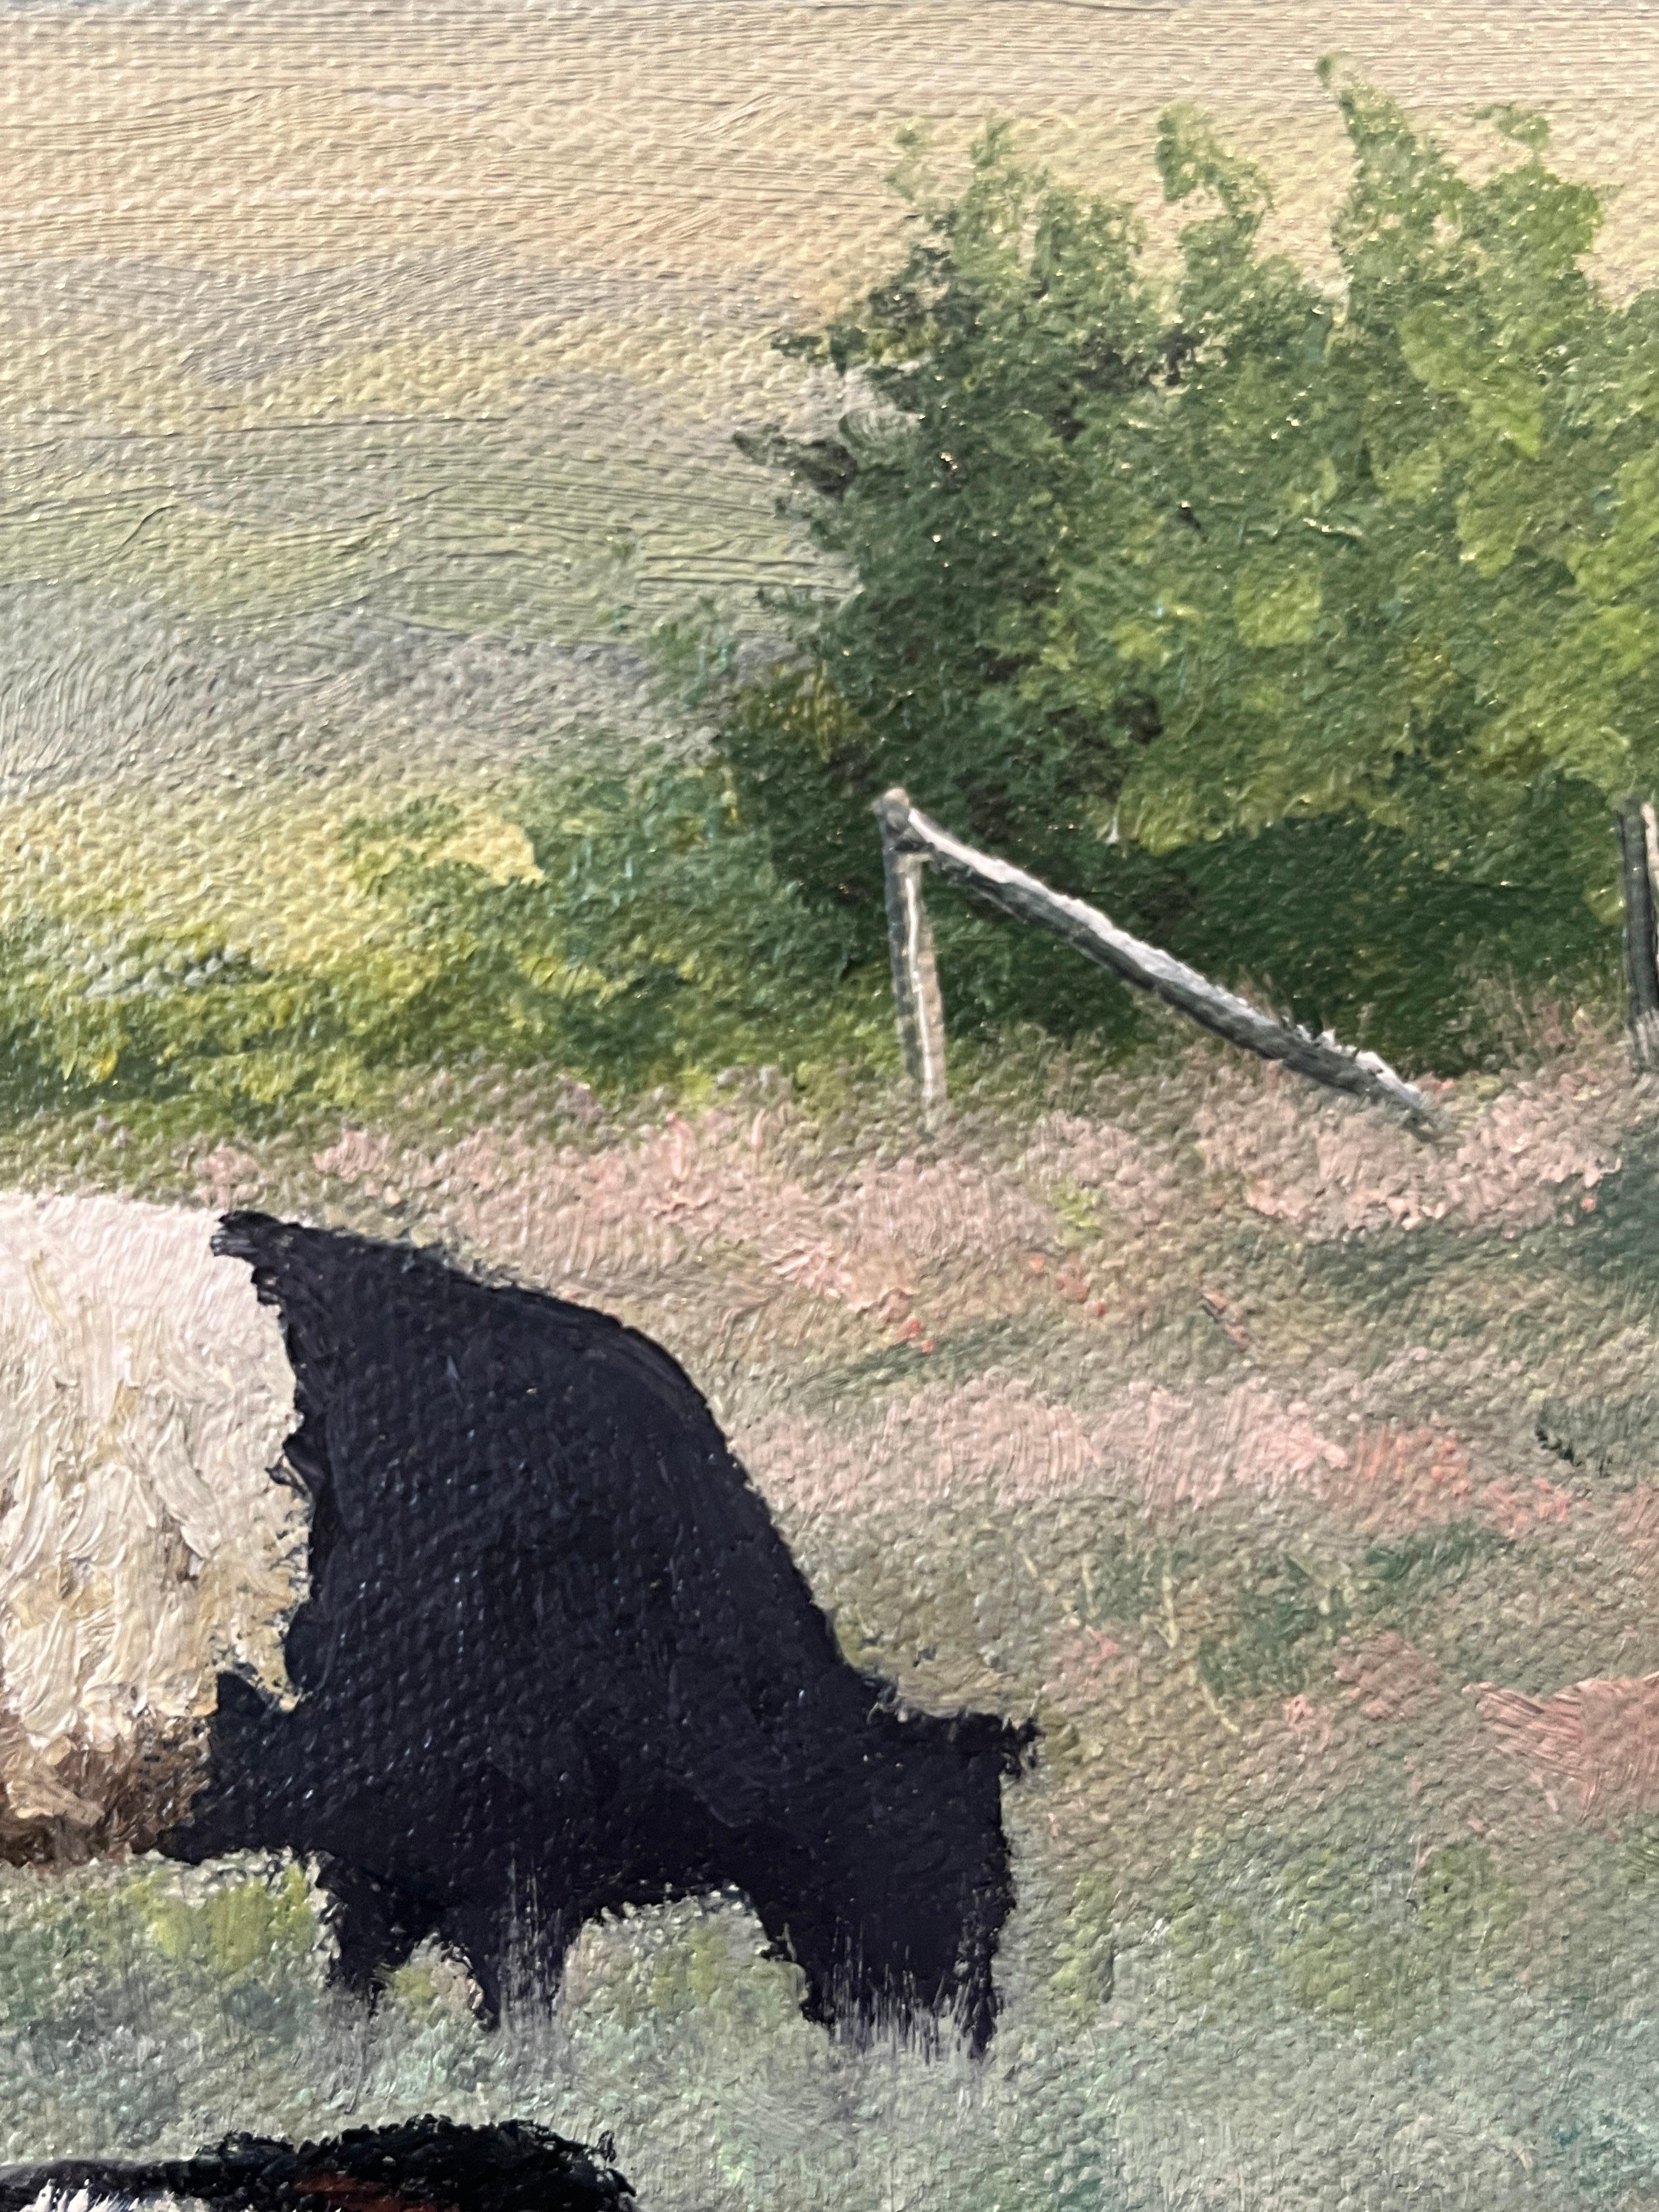 This piece is an original oil on canvas painting by Maine artist Brian Kliewer. Kleiwer paints the landscapes around his home in coastal Maine. Here he has painted the Belted Galloway cows that are seen in the area as they are hearty enough to